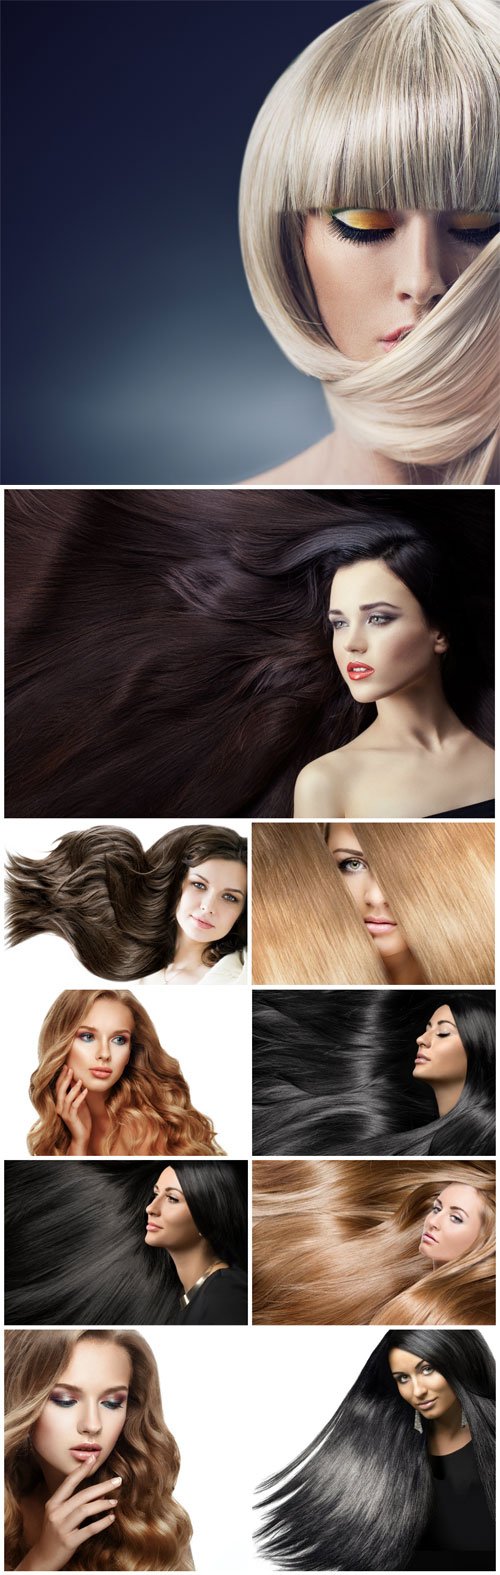 Girls with luxurious long hair - Stock photo